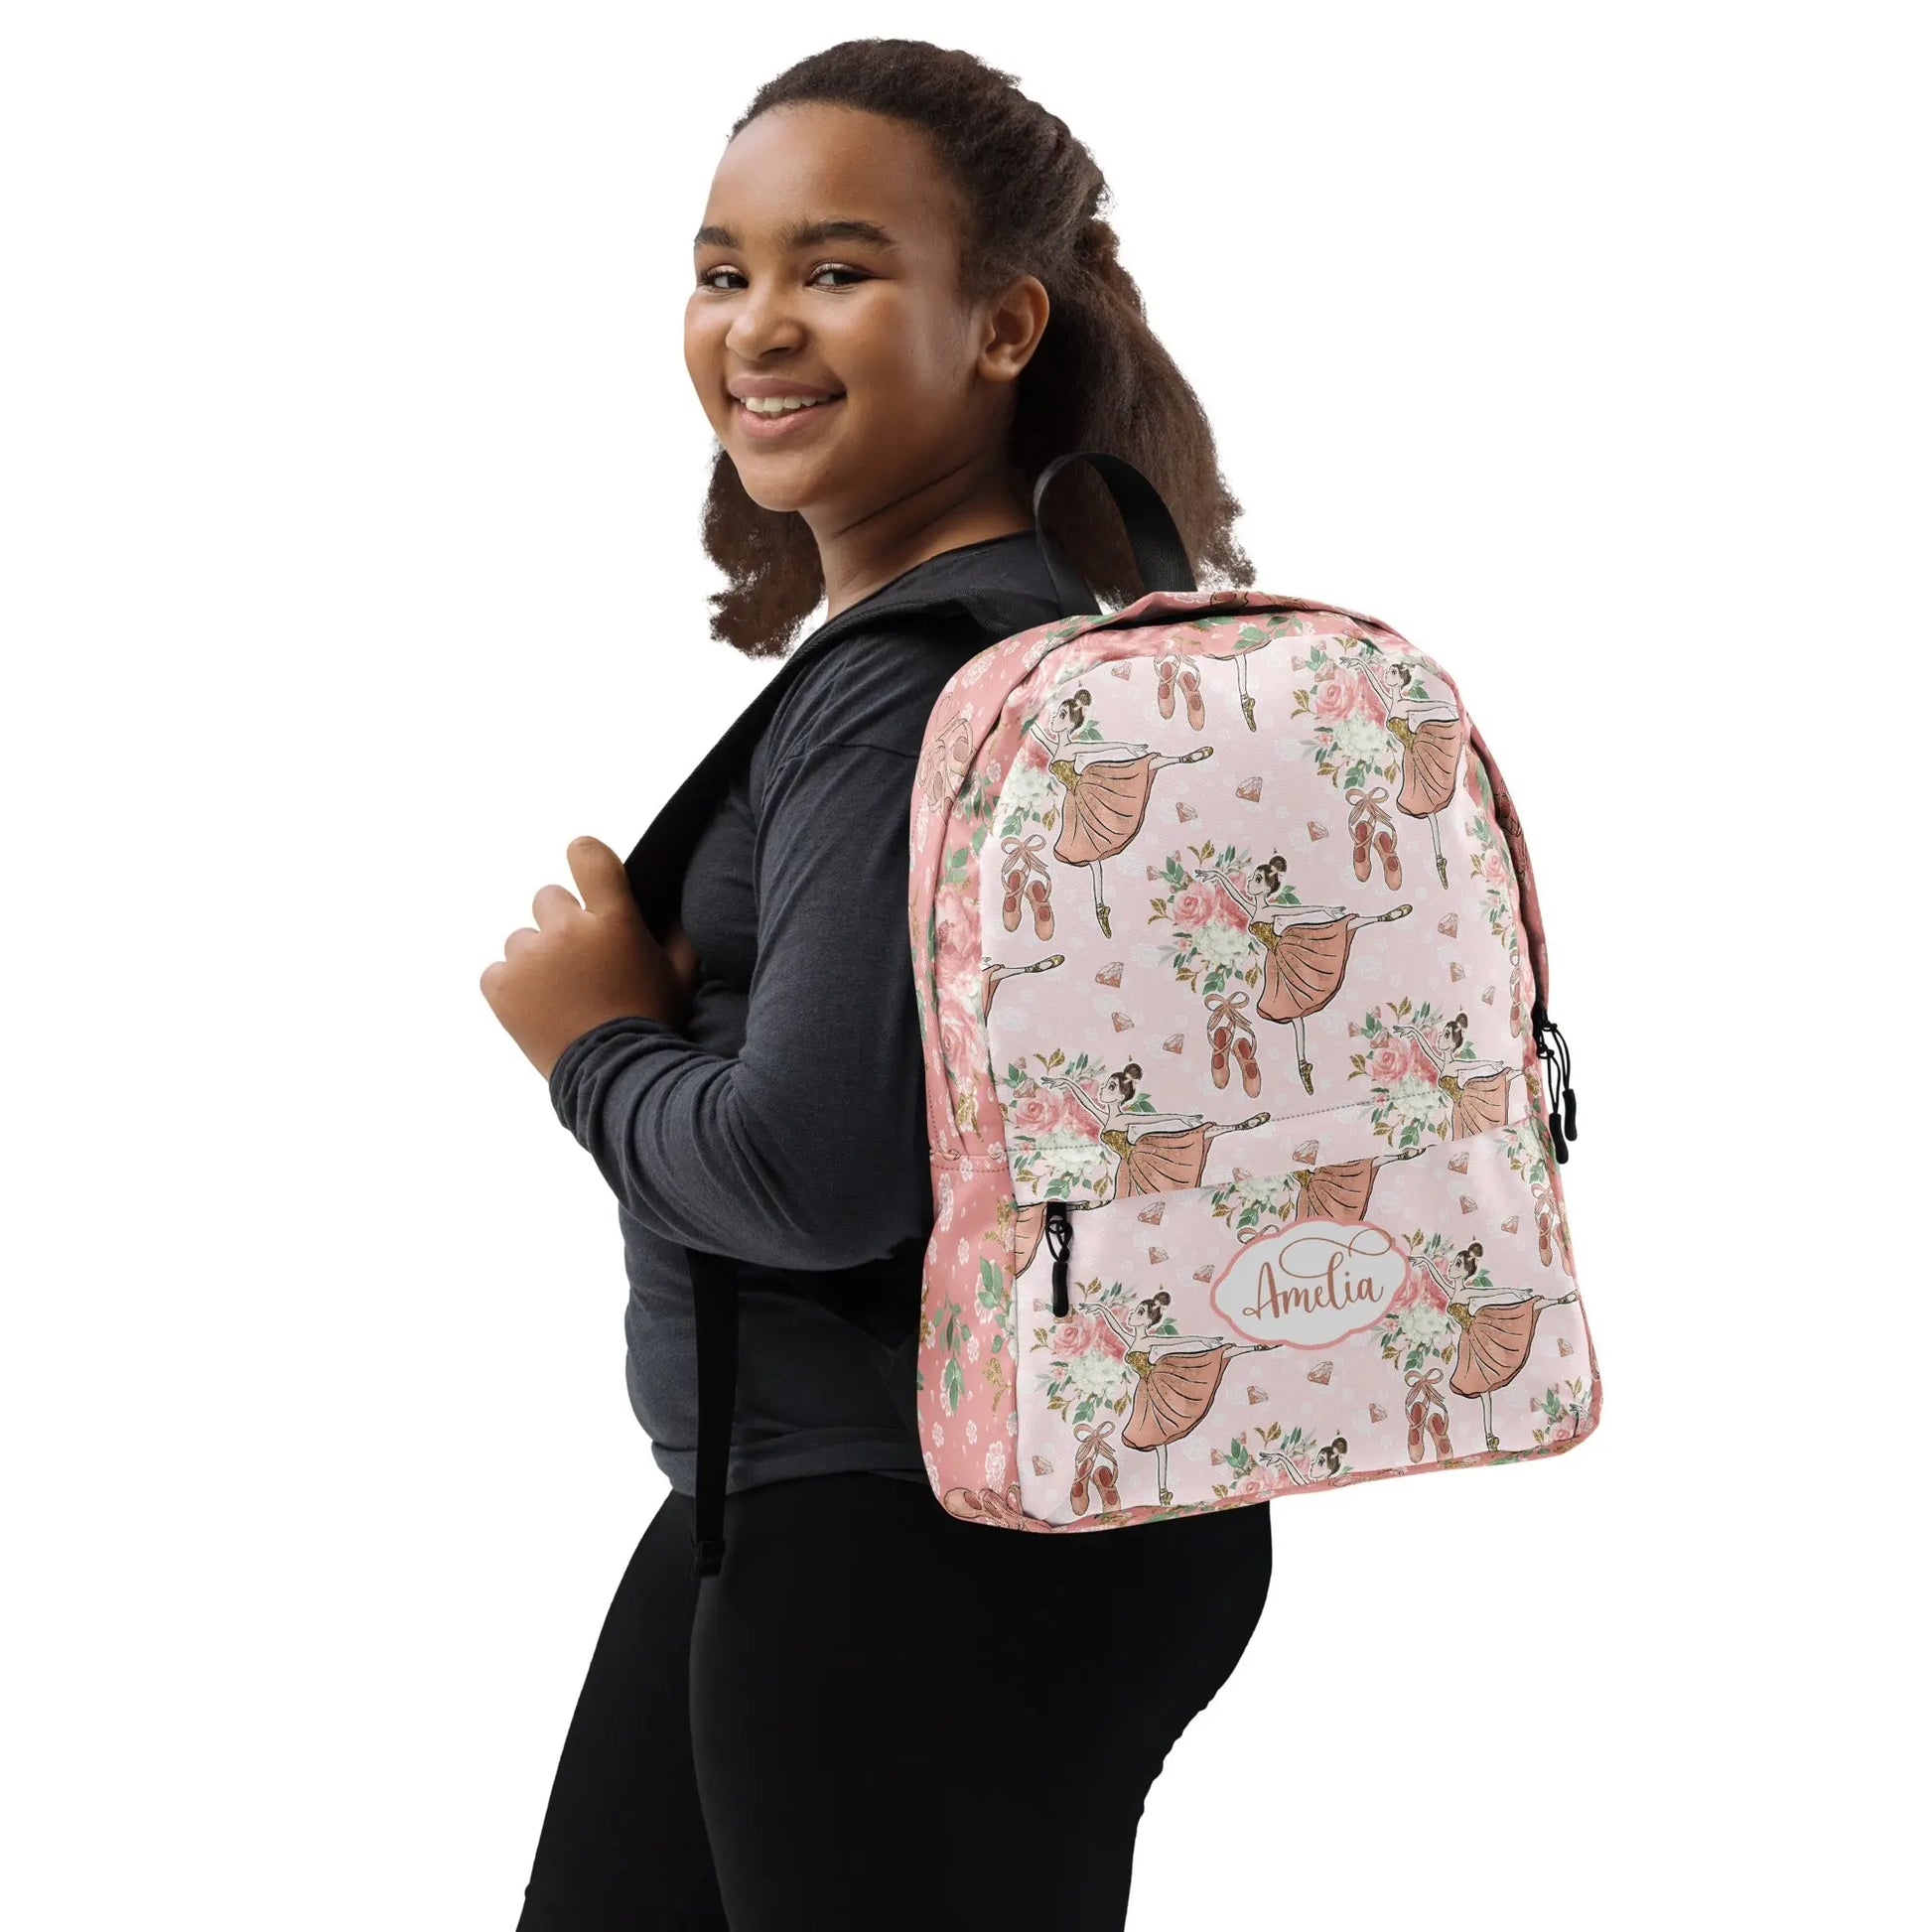 Personalized Ballet Backpack Amazing Faith Designs